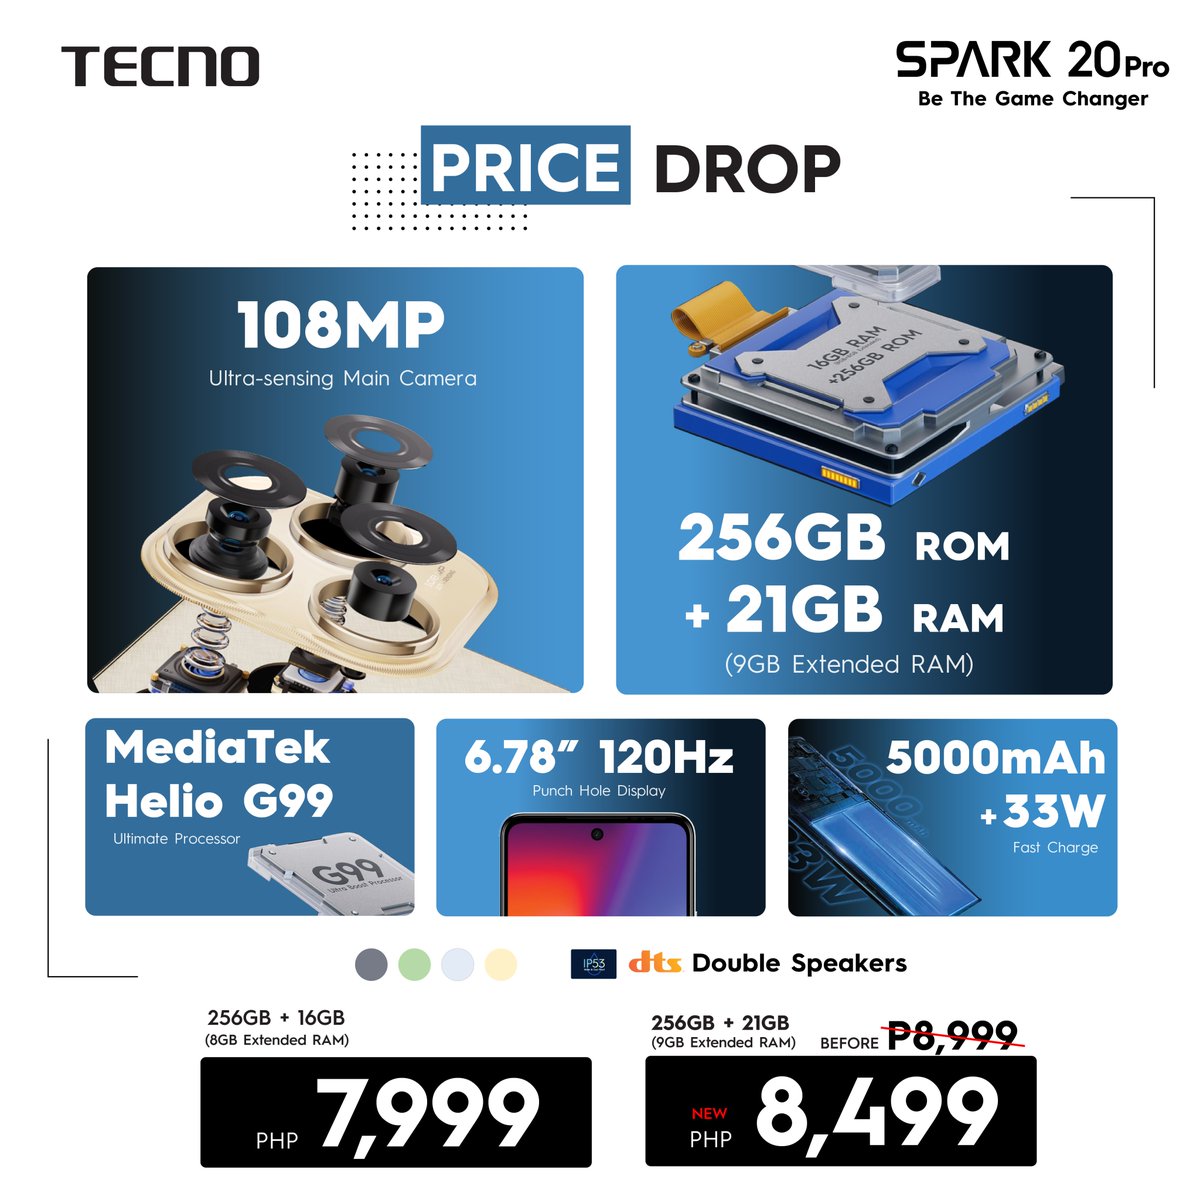 Price Drop Alert! 🚨 Exciting news! The #SPARKGo2024 and #SPARK20Pro are now offered at an even more budget-friendly price! 

Visit the nearest TECNO Stores now!
tecno-mobile.com/ph/stores/

#TECNOSPARK20Series #BeTheGameChanger #SPARKGo2024 #DoubleUpLevelUp #TECNOPhilippines